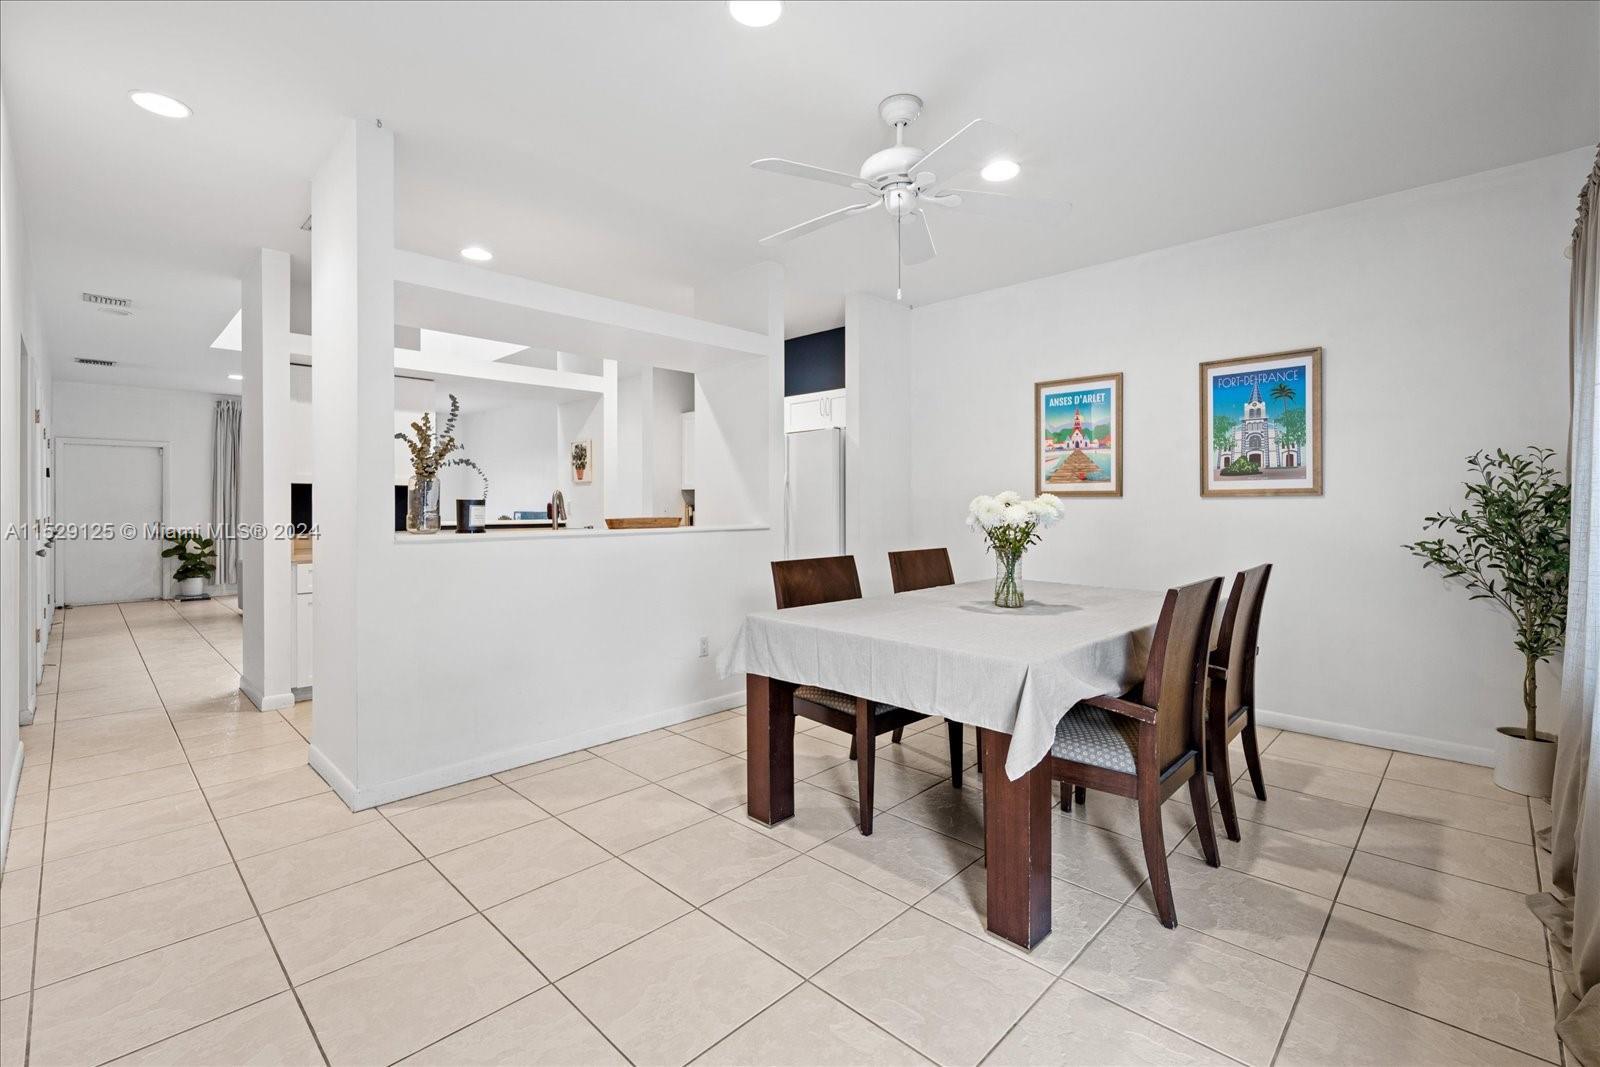 Photo of 726 NE 5th Ave #726 in Fort Lauderdale, FL